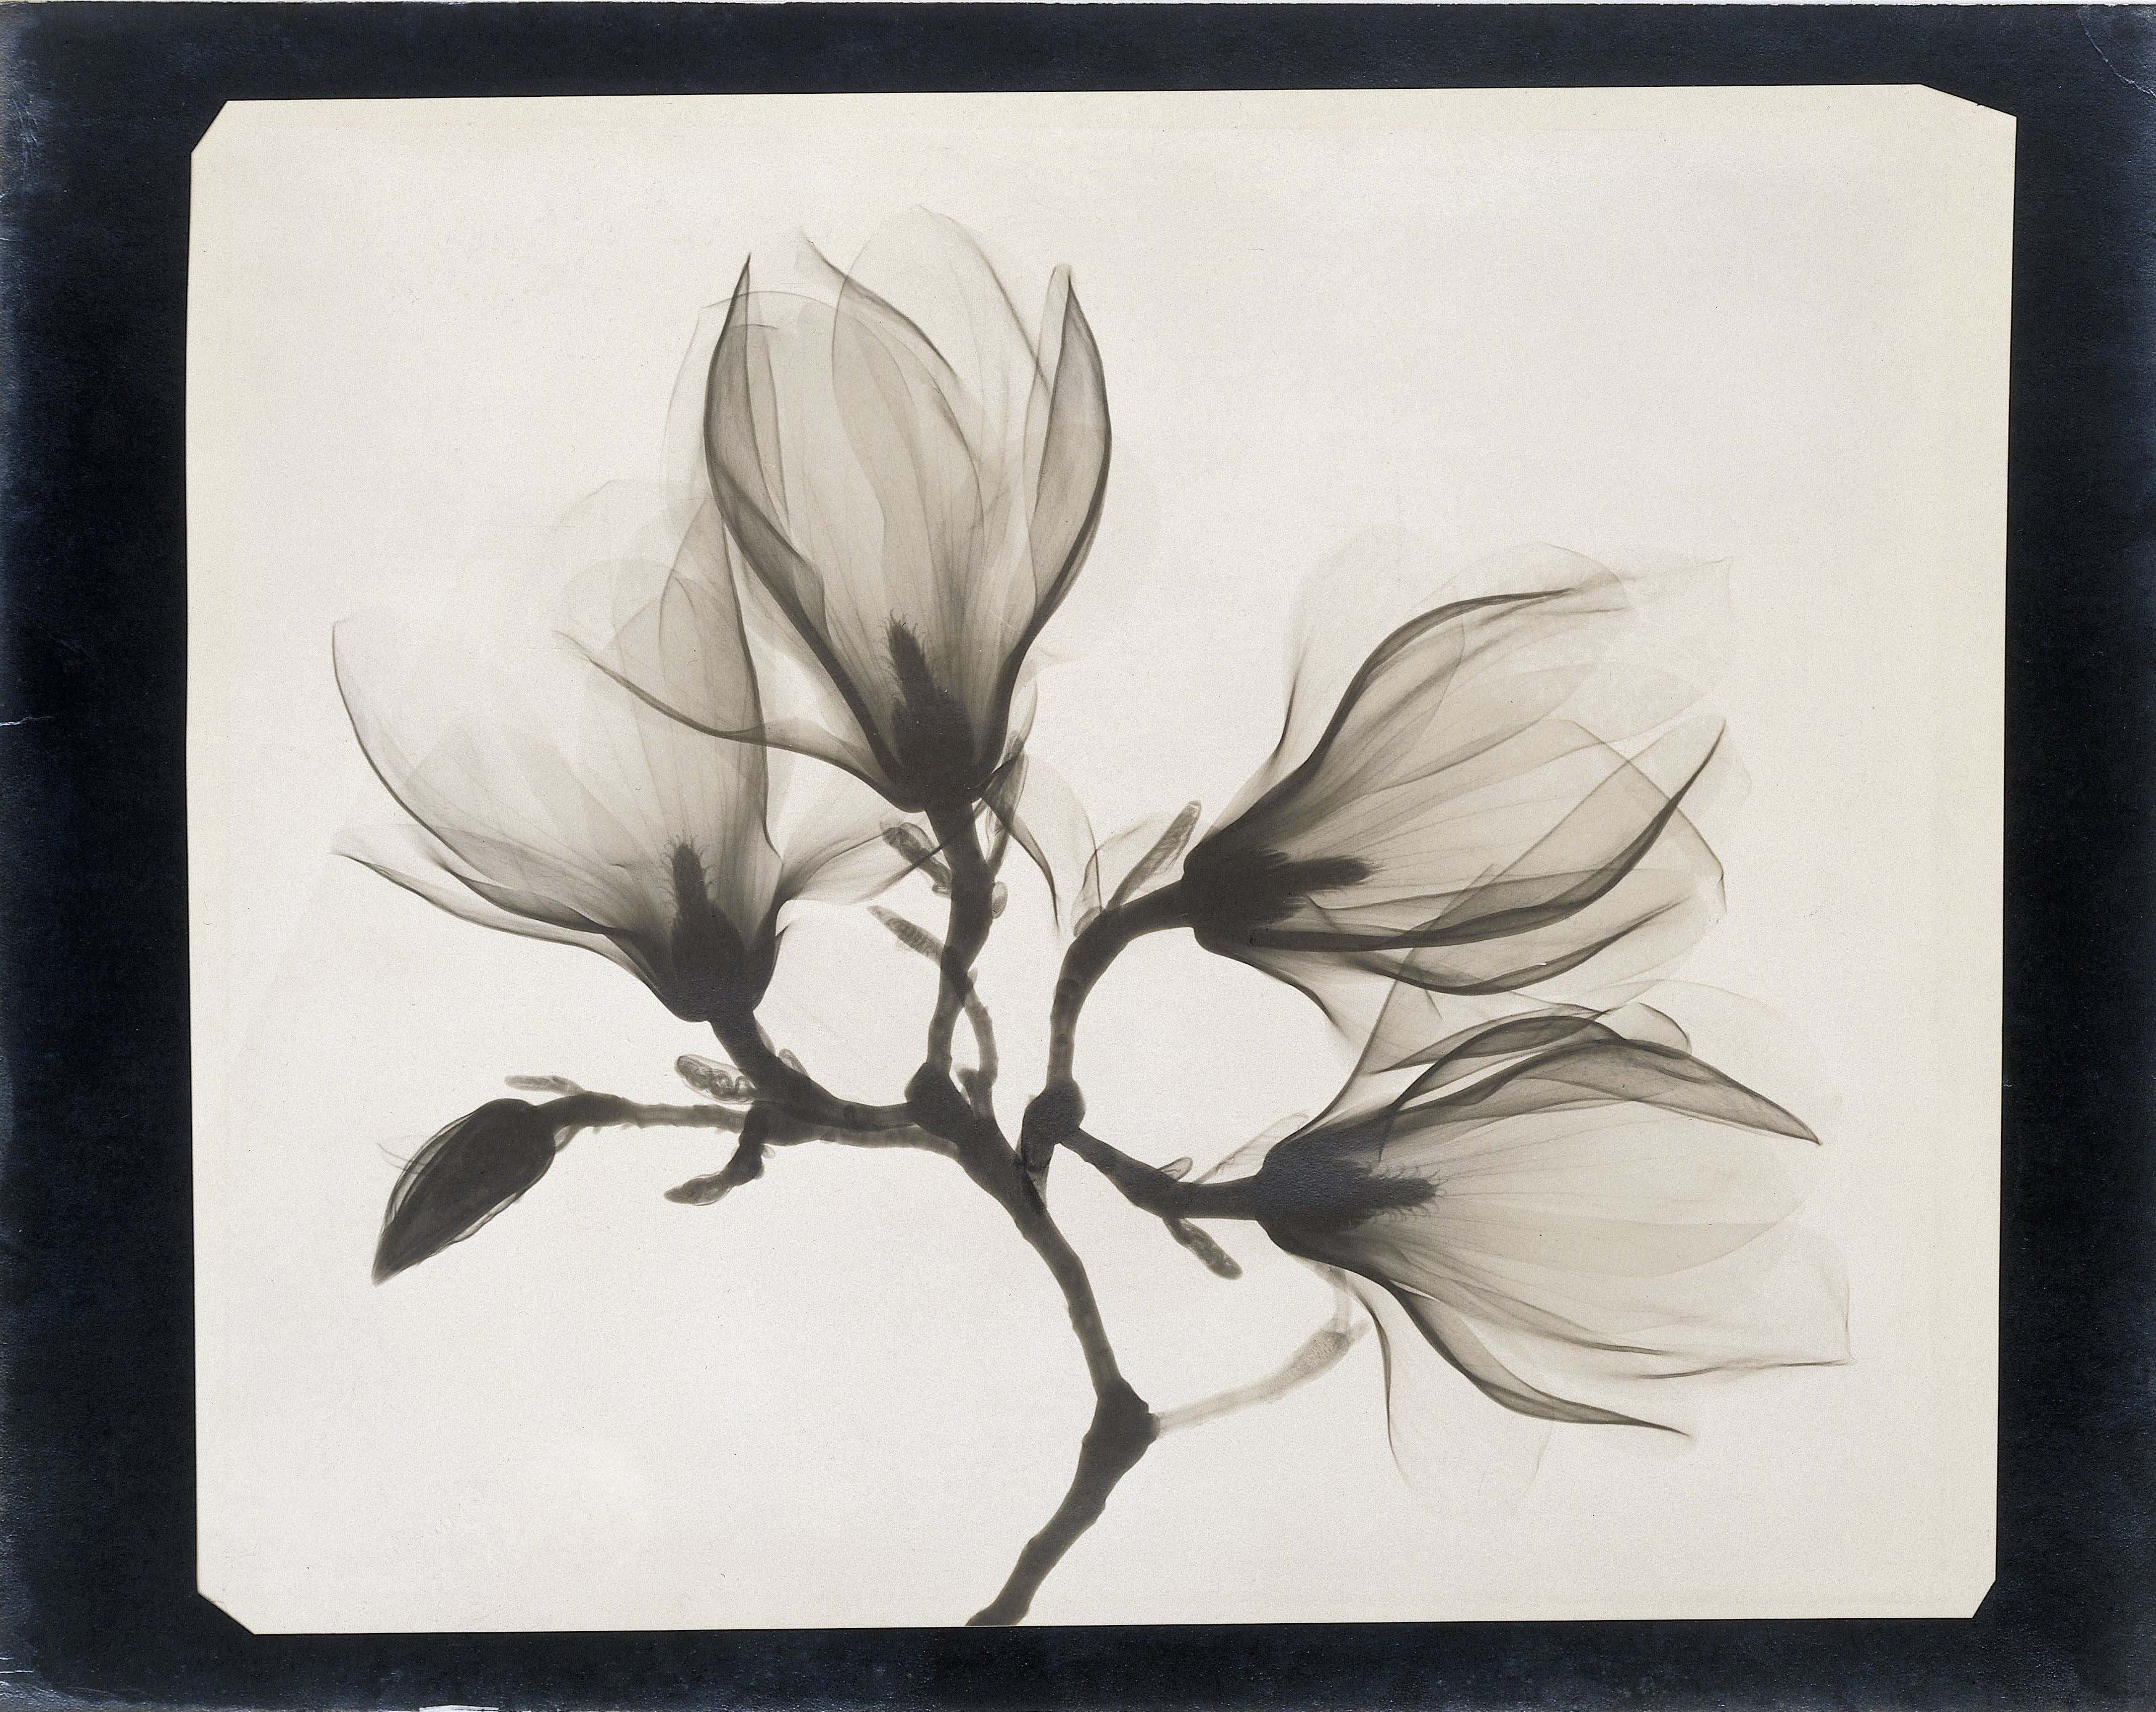 Magnolia Branch with Four Flowers | Sprig with Four Magnolia Flowers, 1910-1925, x-ray photograph on Baryta paper. Anonymous. | src Rijksmuseum